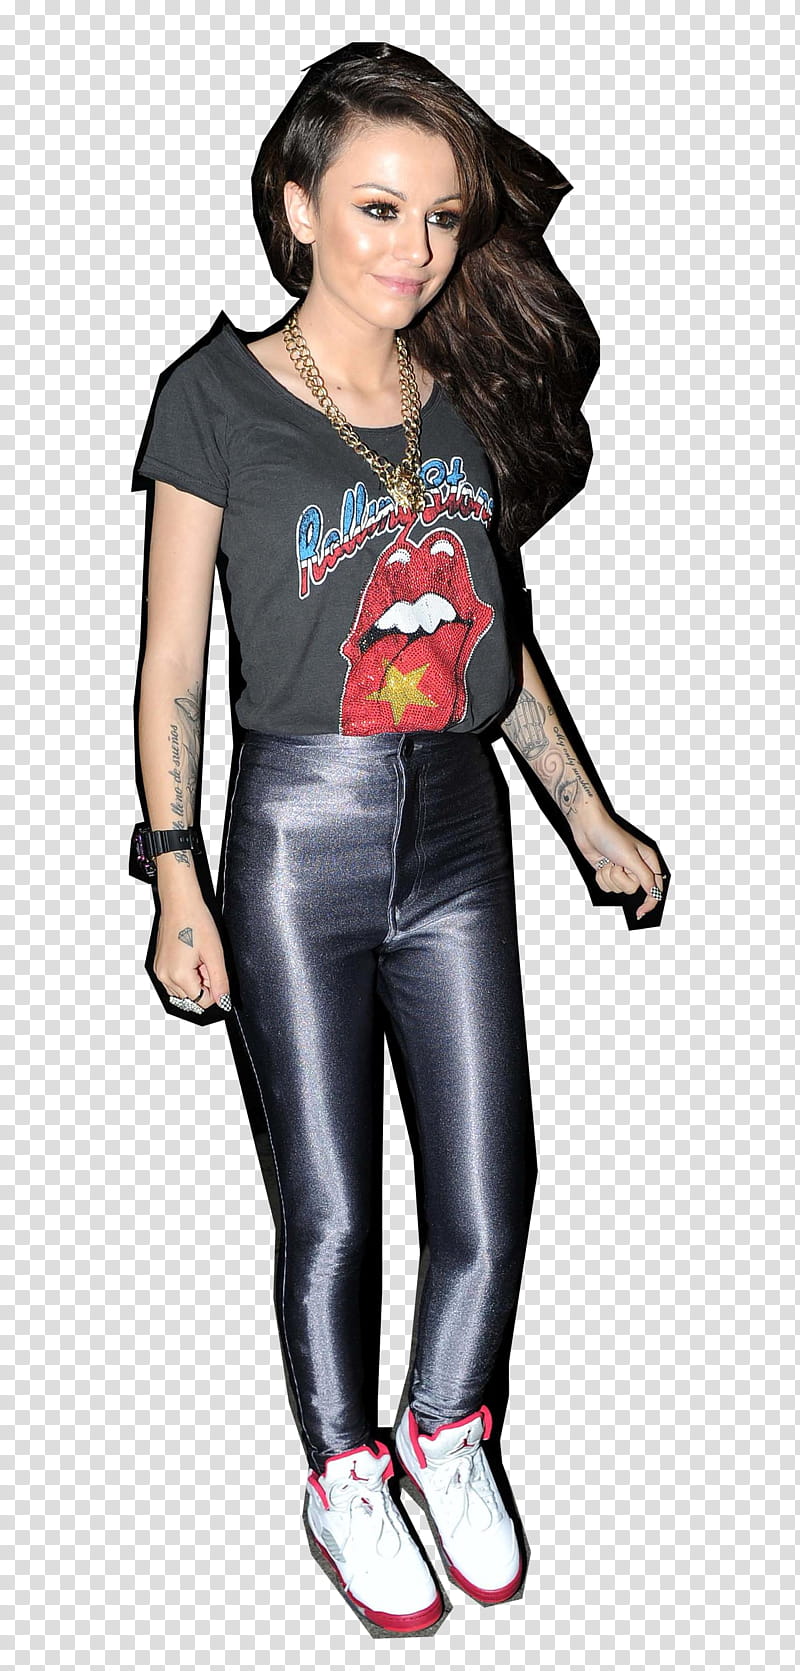 Cher Lloyd Woman Wearing Gray Shirt And Pants Transparent Background Png Clipart Hiclipart